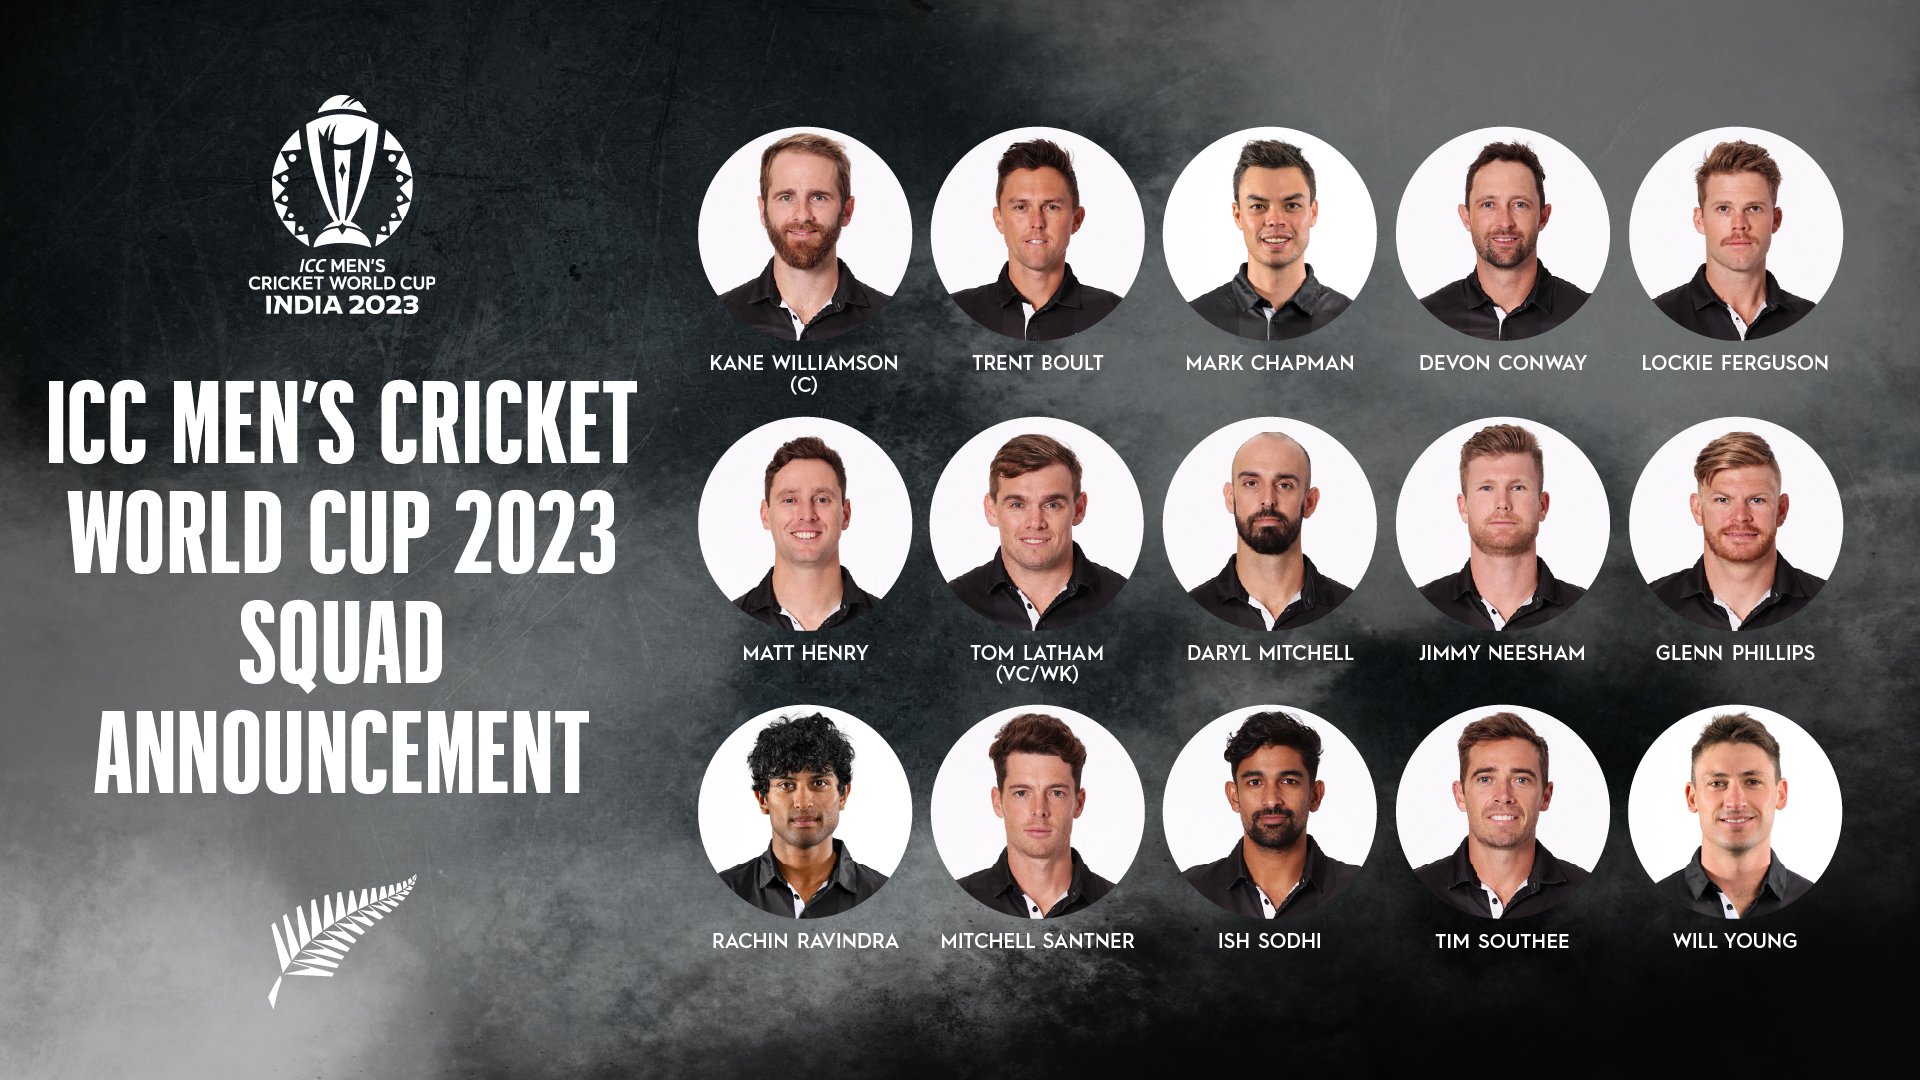 ICC Mens Cricket World Cup 2023 : New Zealand 